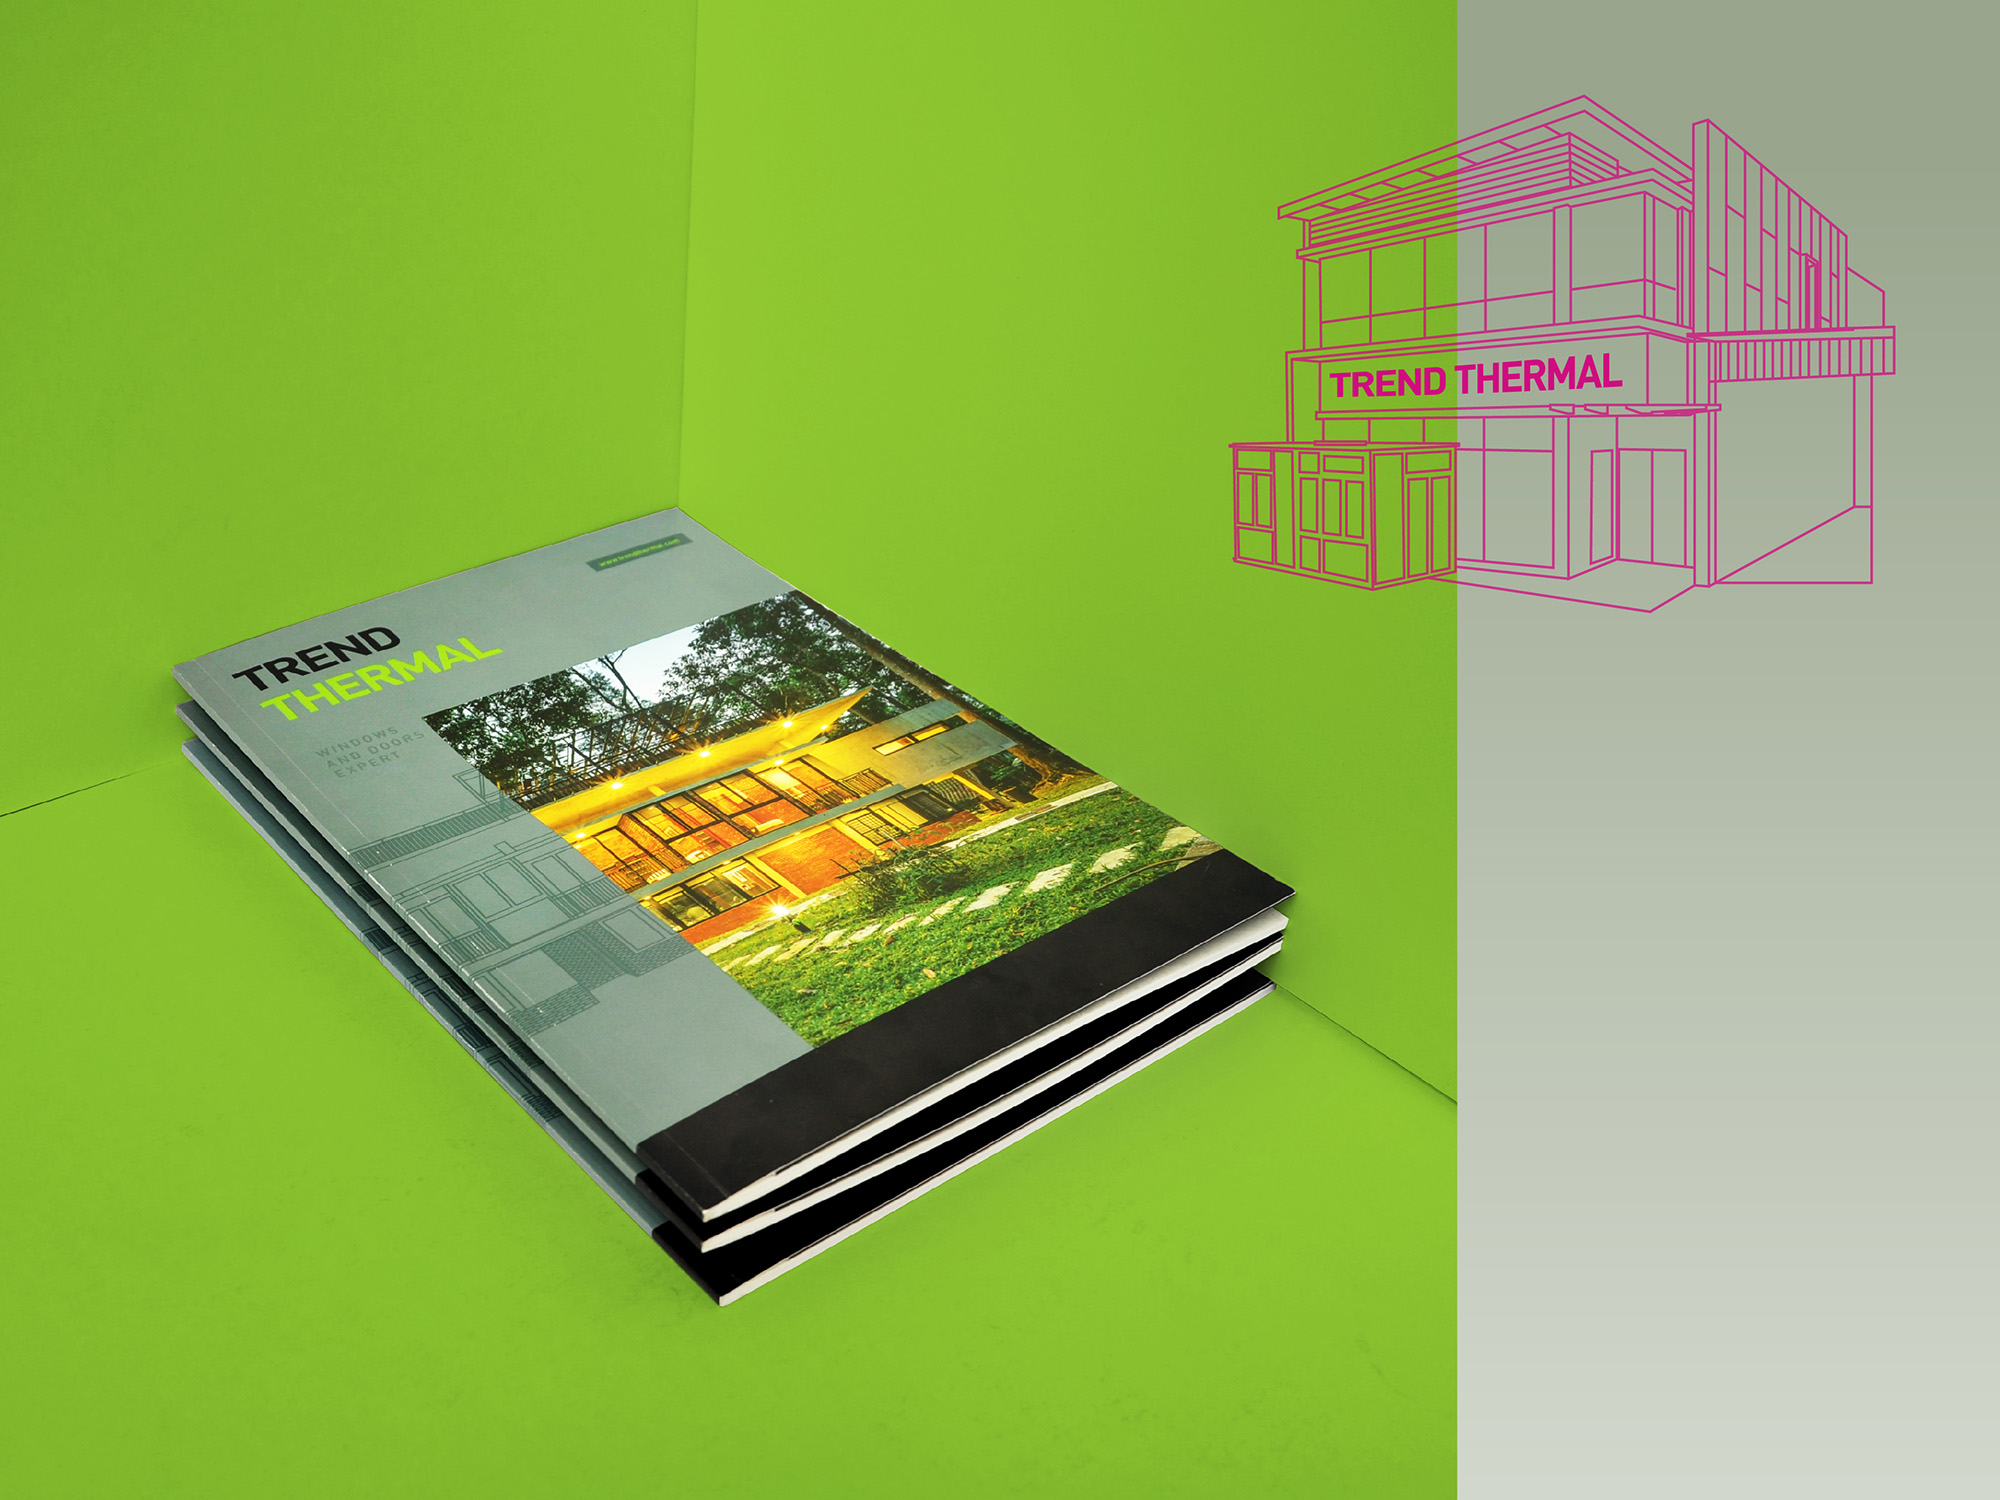 Trend Thermal company profile and catalogue cover design using brand colours of green and black with architecture photography and spot uv treatment against a green background and headquarter building illustration on the top right